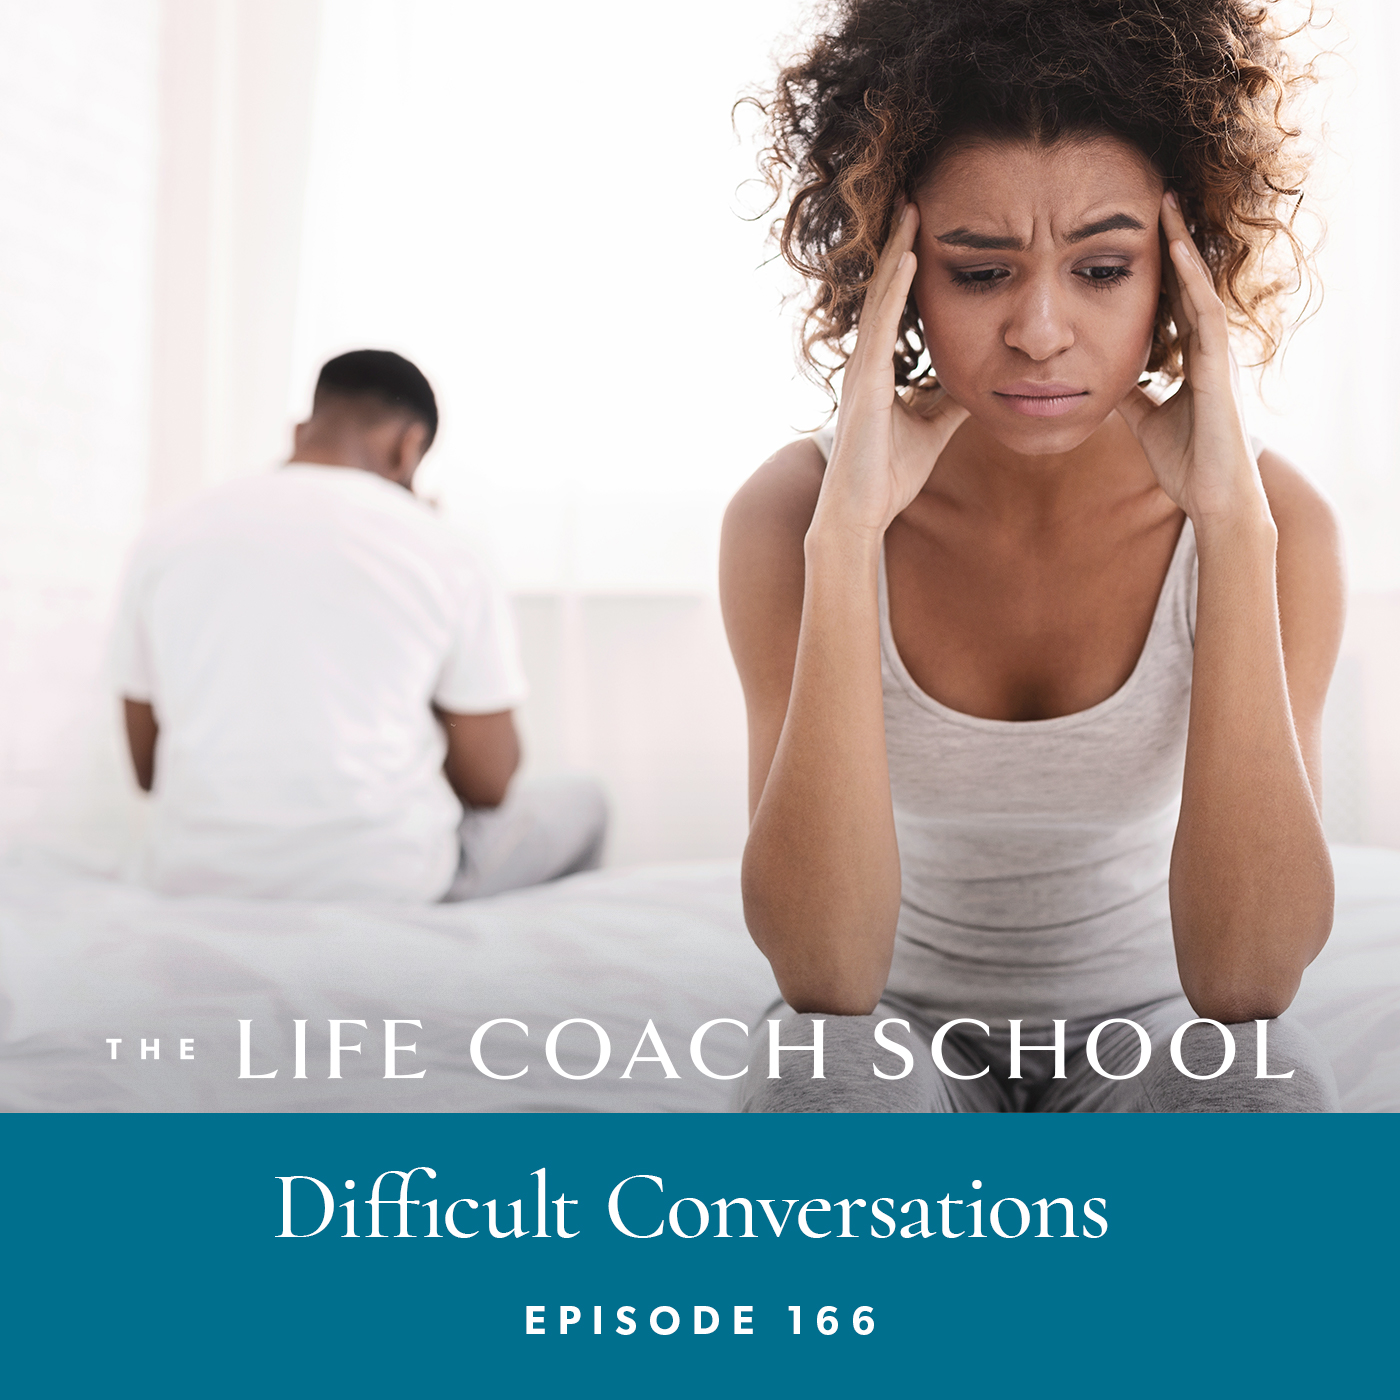 The Life Coach School Podcast with Brooke Castillo | Episode 166 | Difficult Conversations